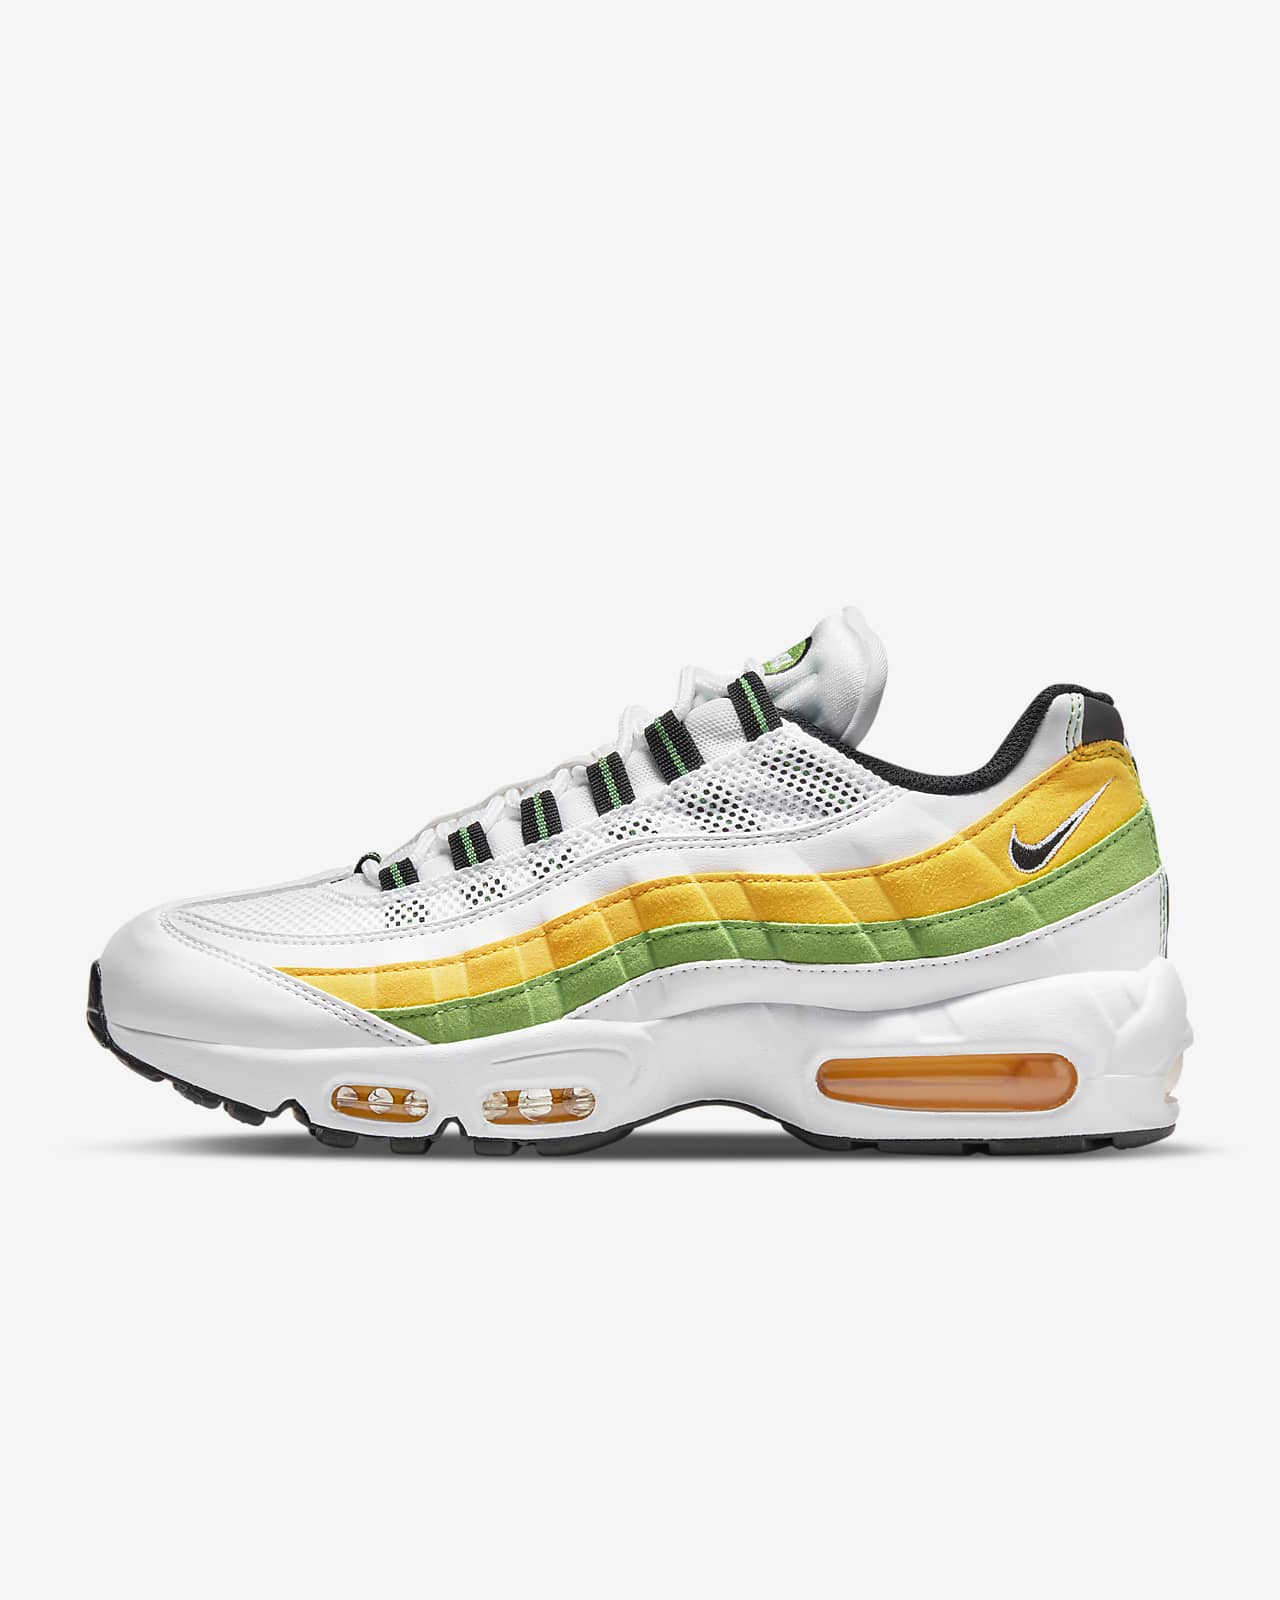 Diálogo once perderse Nike Air Max 95 Essential Men's Shoes. Nike MY